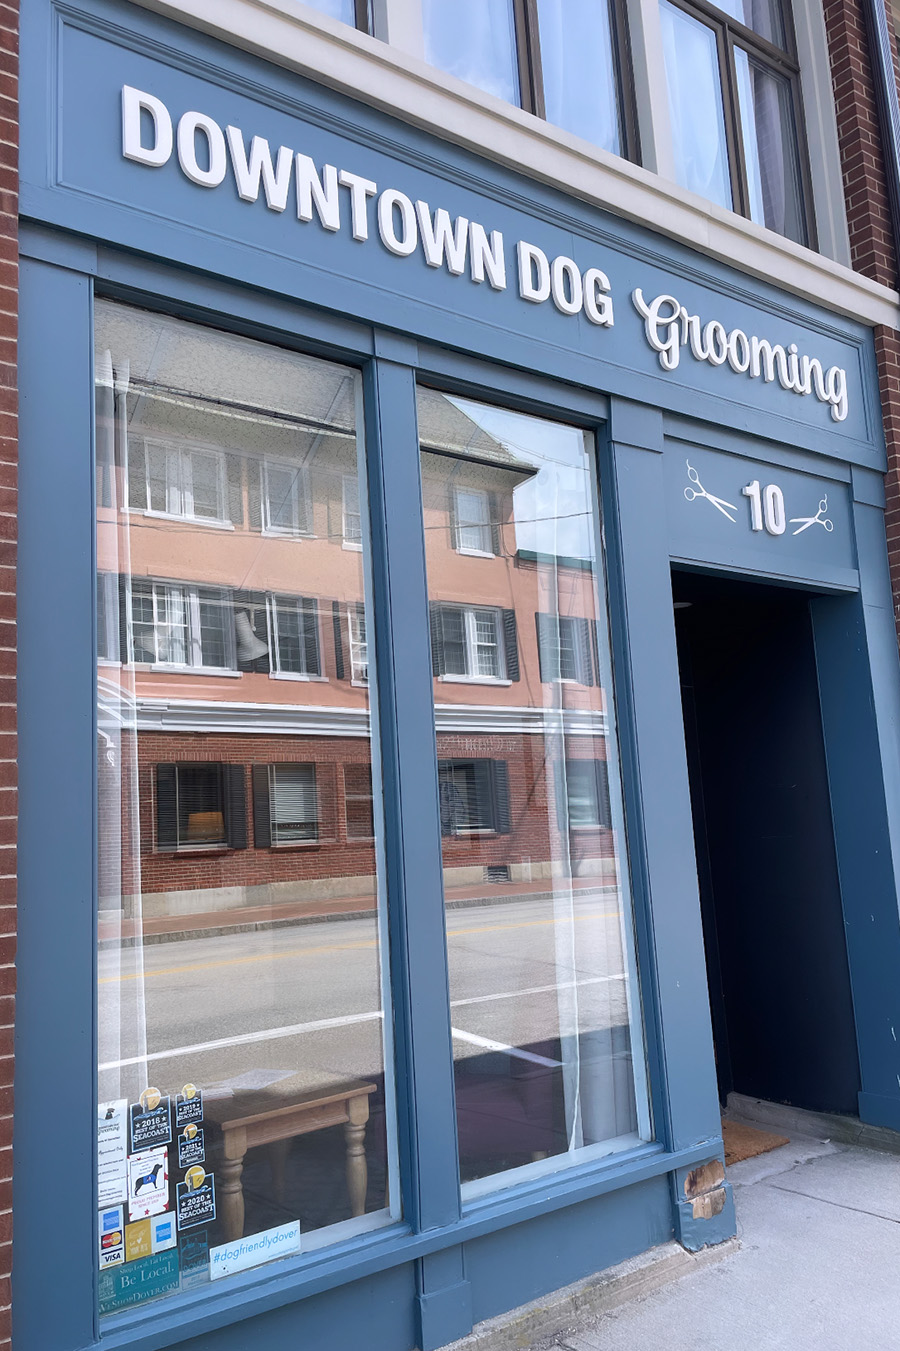 Downtown-Dog-Grooming-storefront-4096